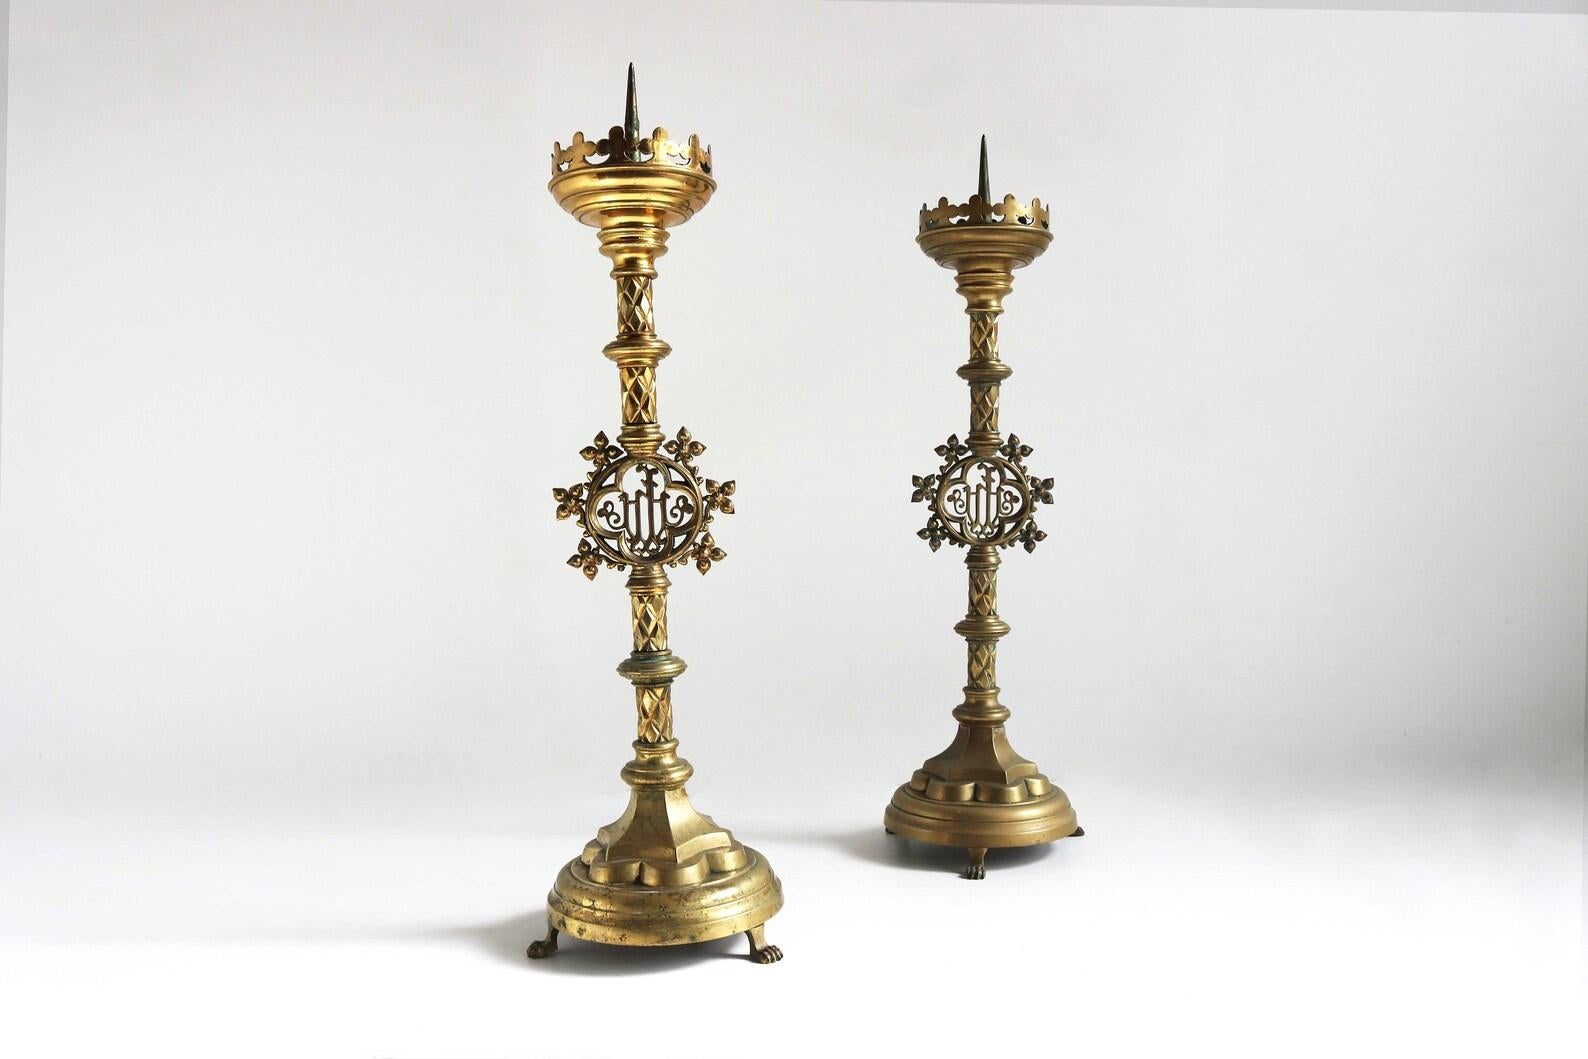 Pair of big gorgeous antique 19th century brass church candlesticks.
They come from the altar of a Belgian church in Brugges. 
They are marked / stamped Brugges 1876. 
Amazing fully original pieces , very large and impressive.
Nice antique eye